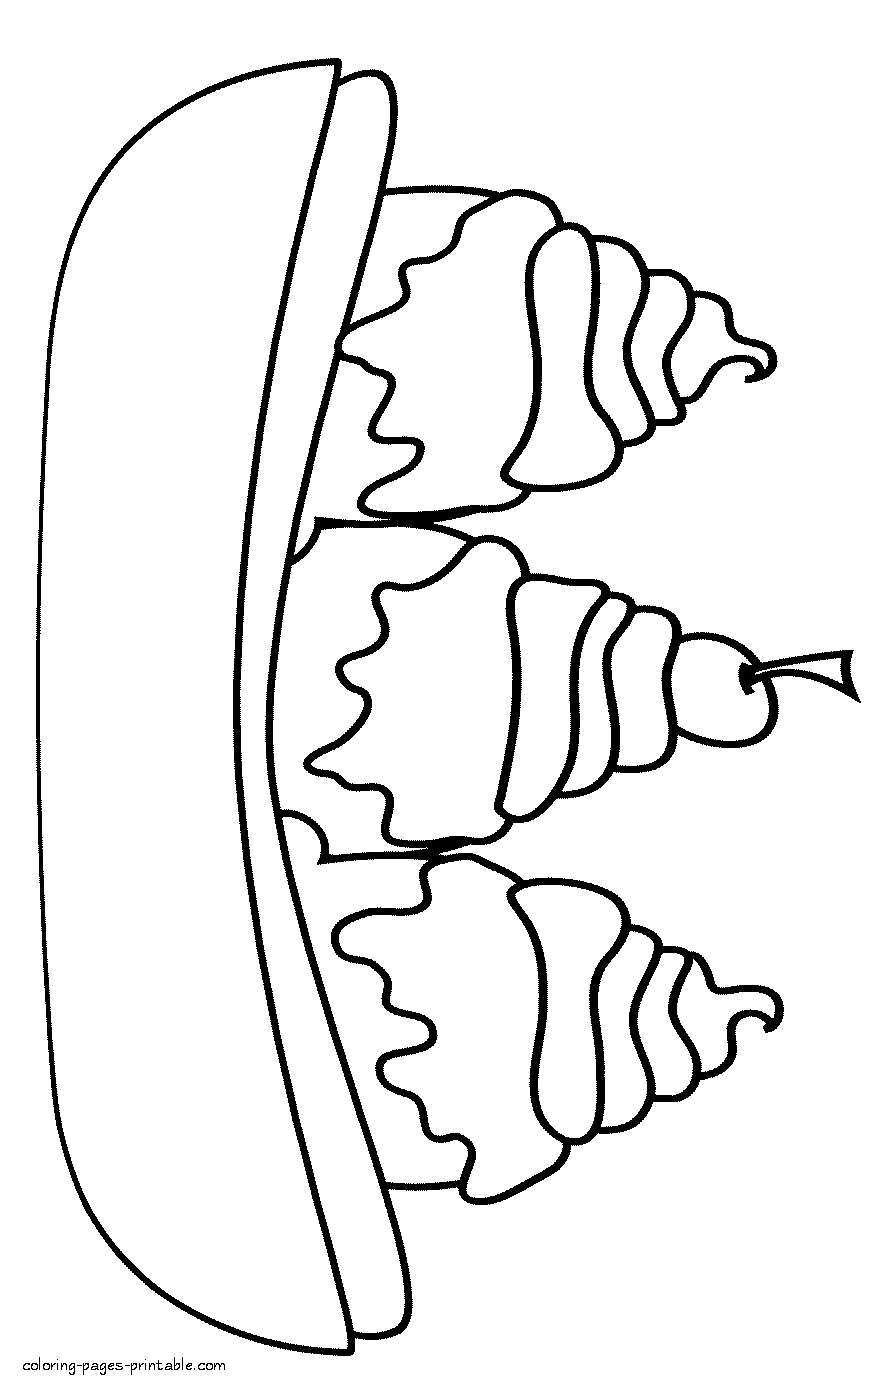 Free coloring page of ice cream